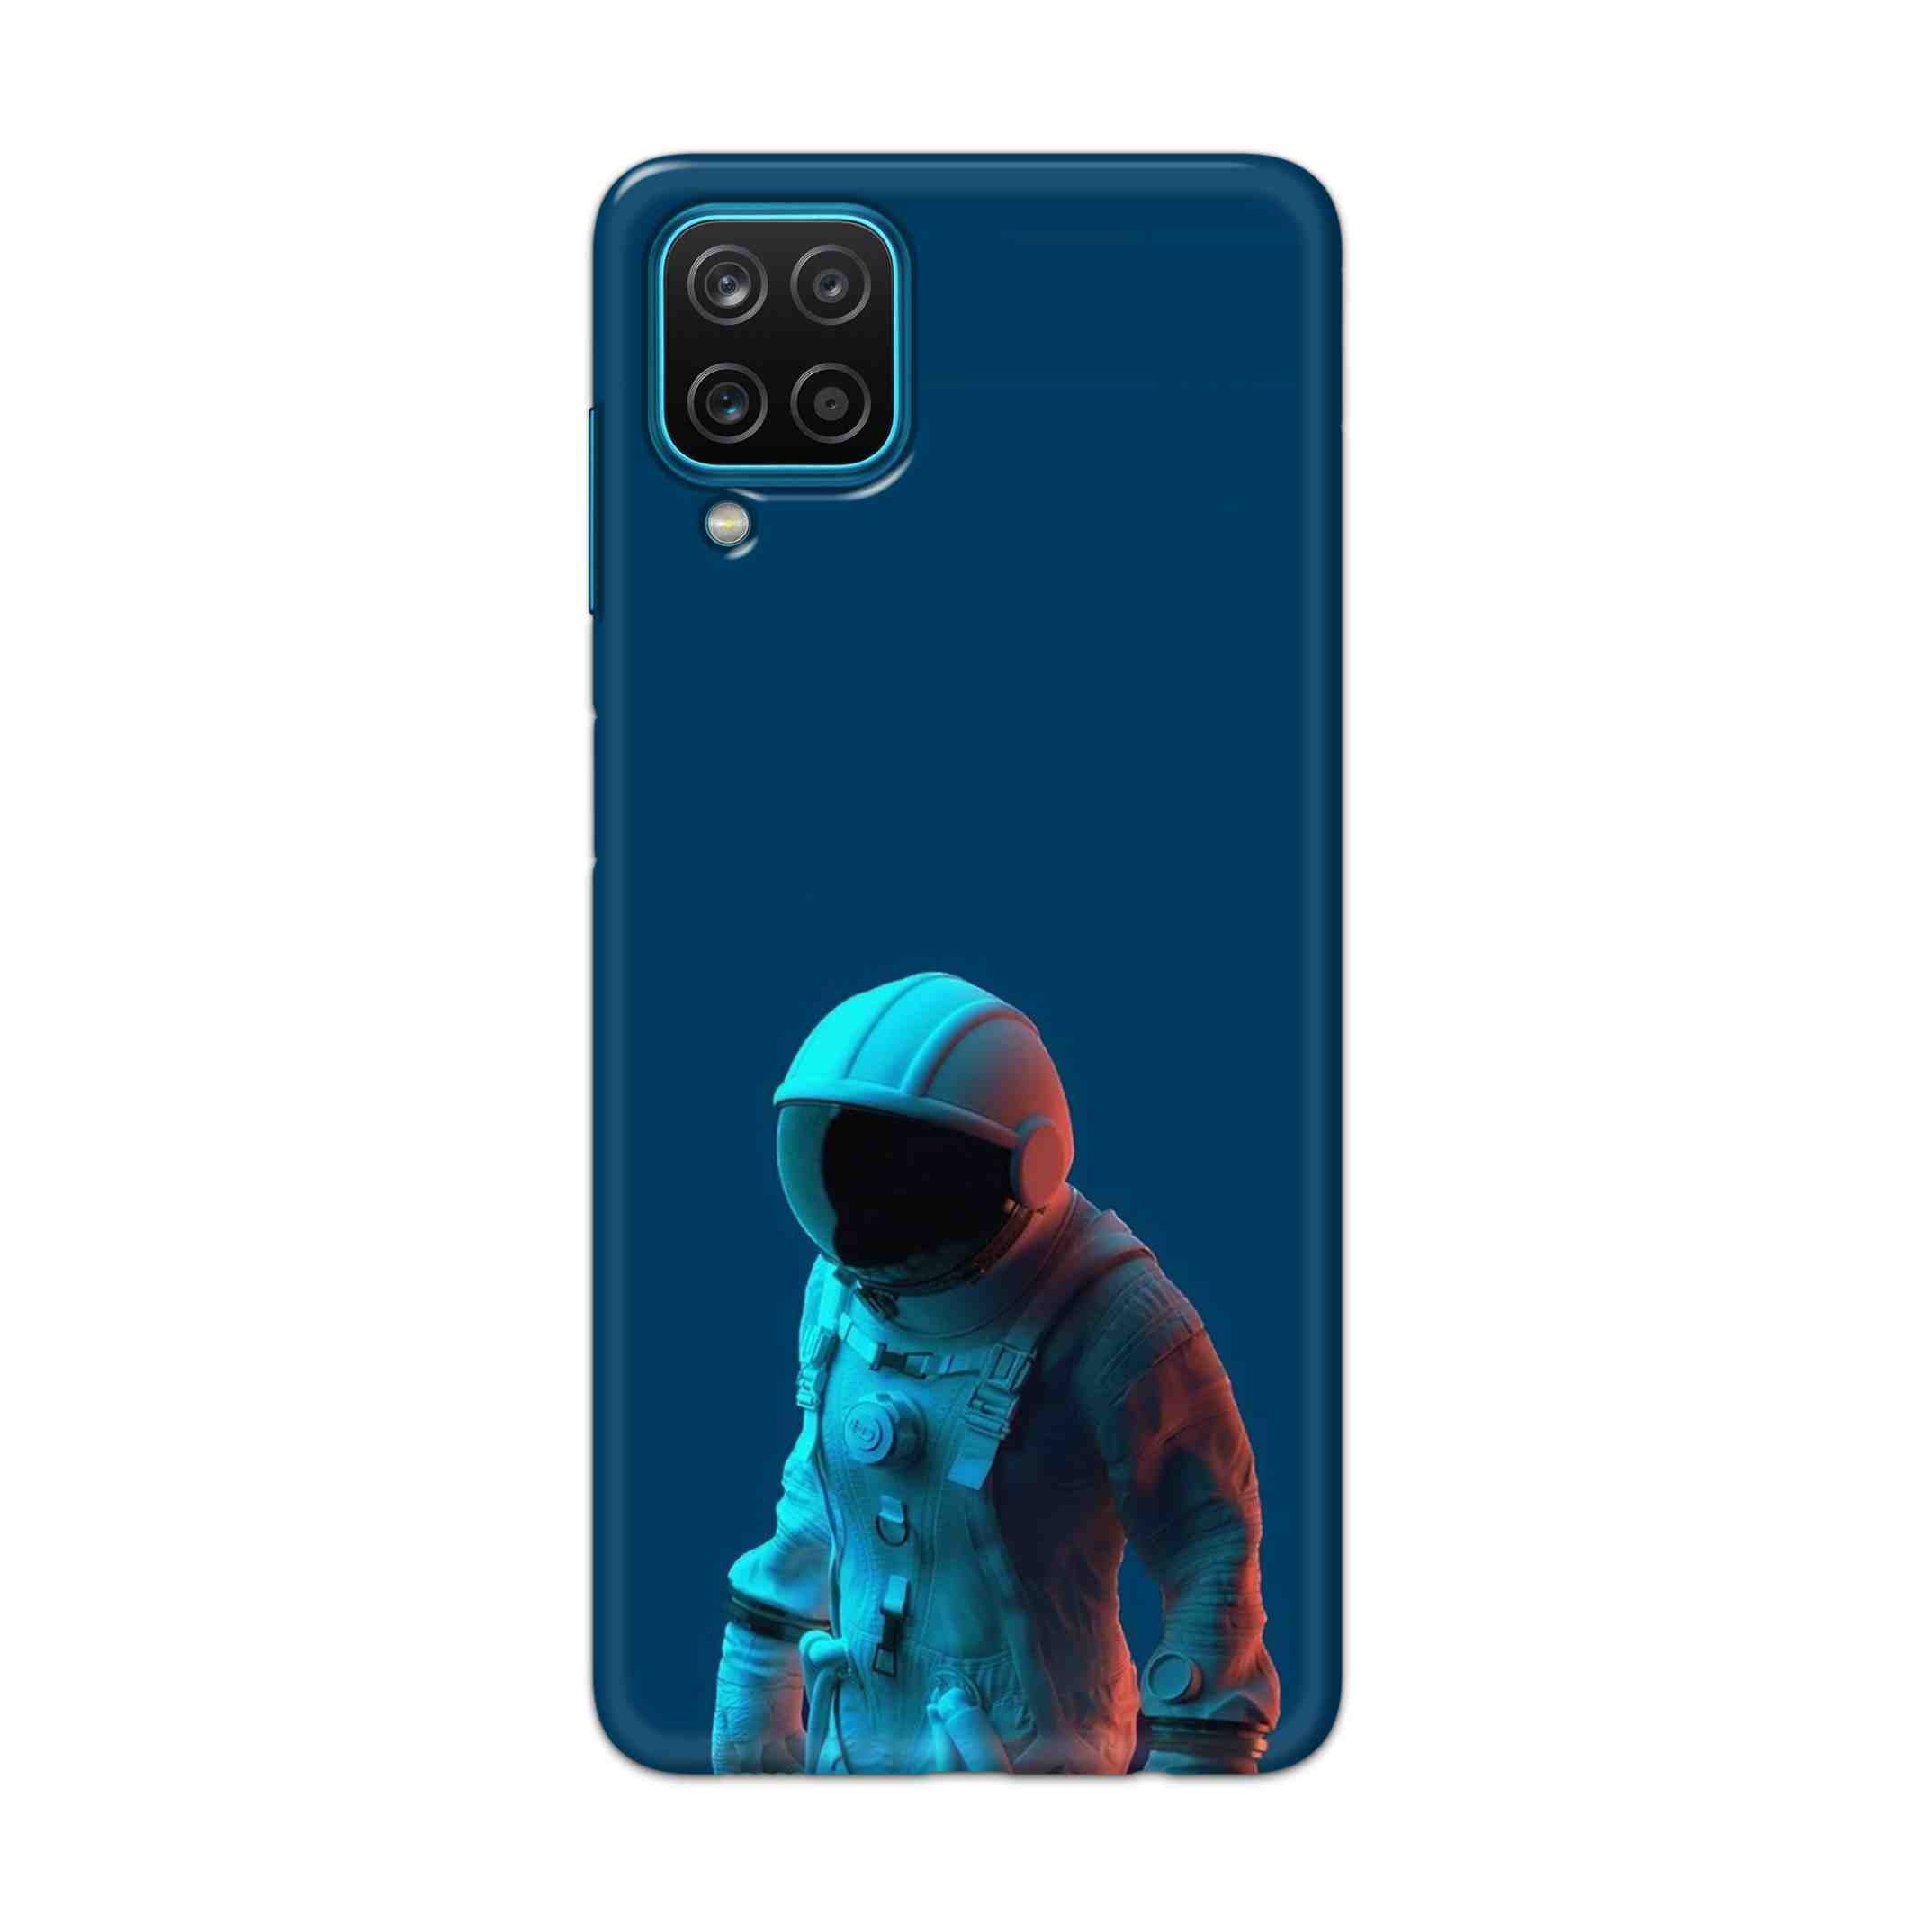 Buy Blue Astronaut Hard Back Mobile Phone Case Cover For Samsung Galaxy A12 Online